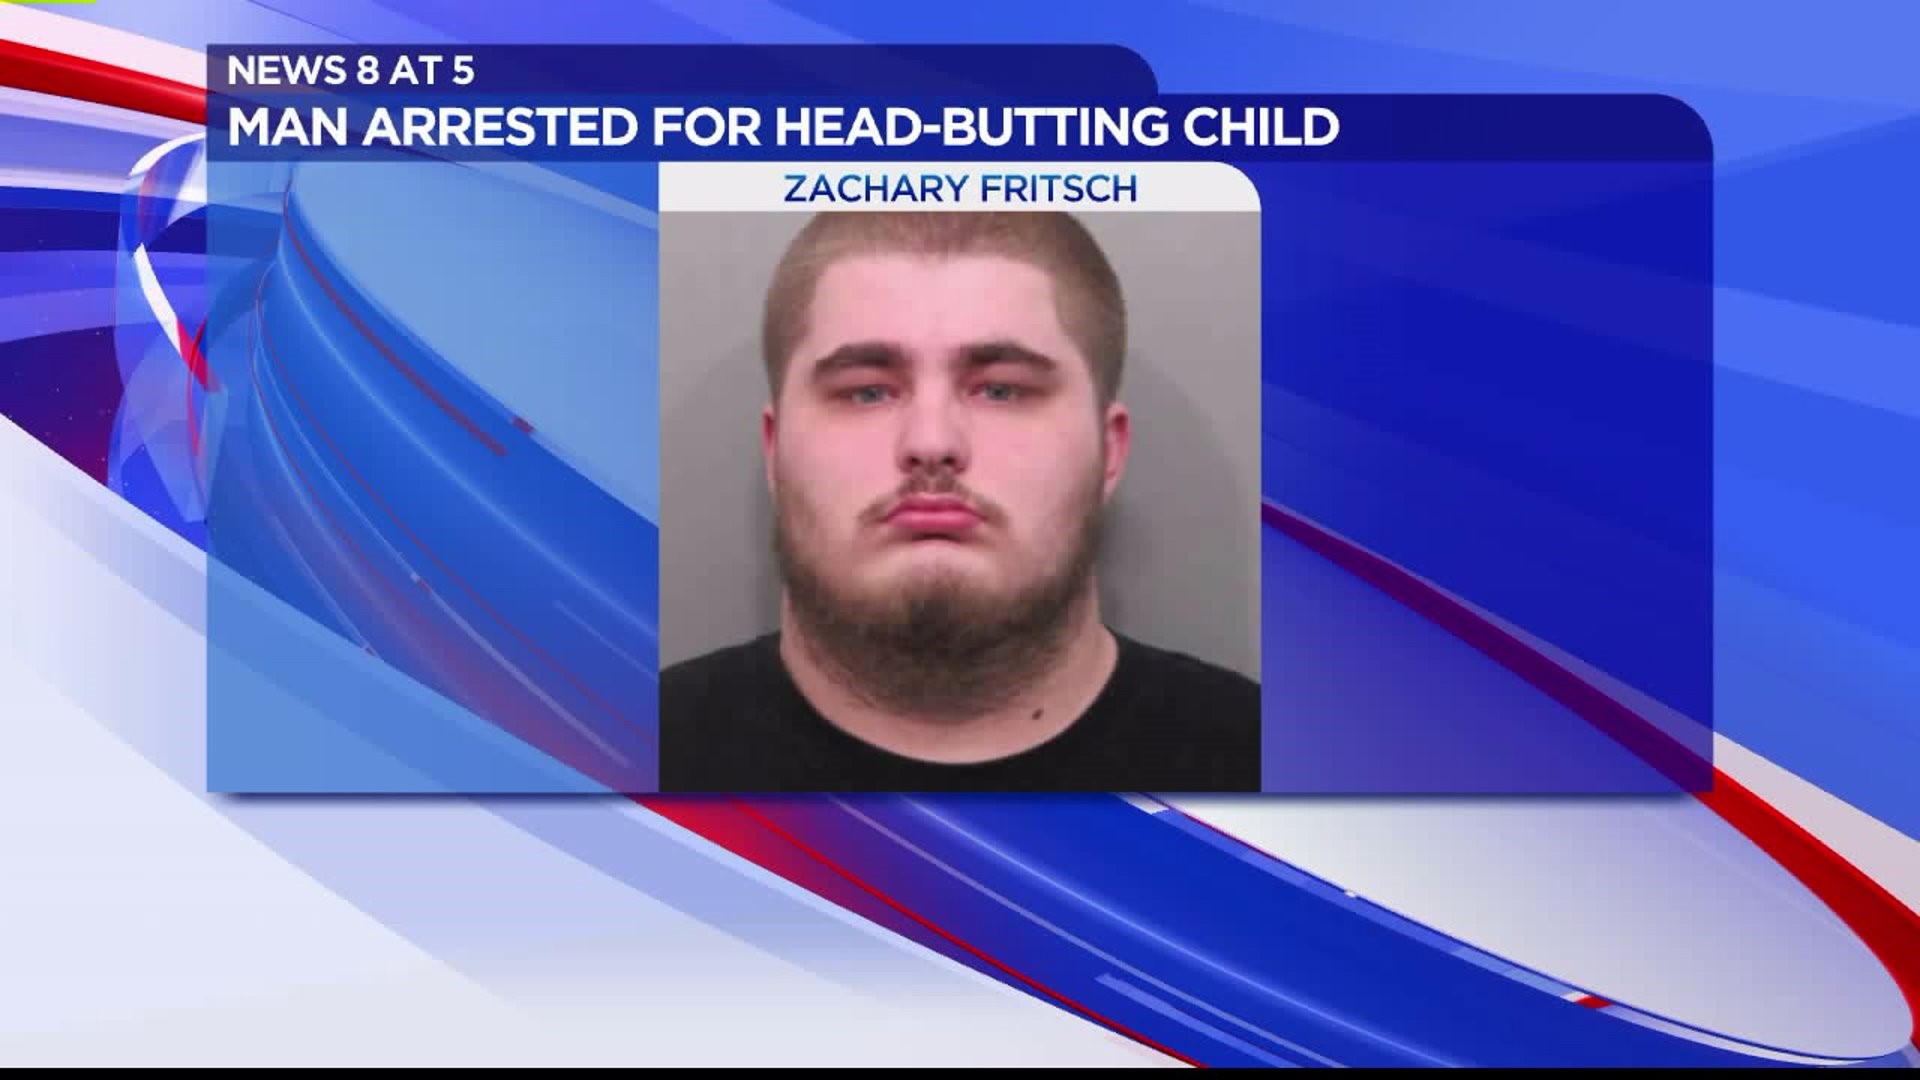 Man arrested for head-butting child